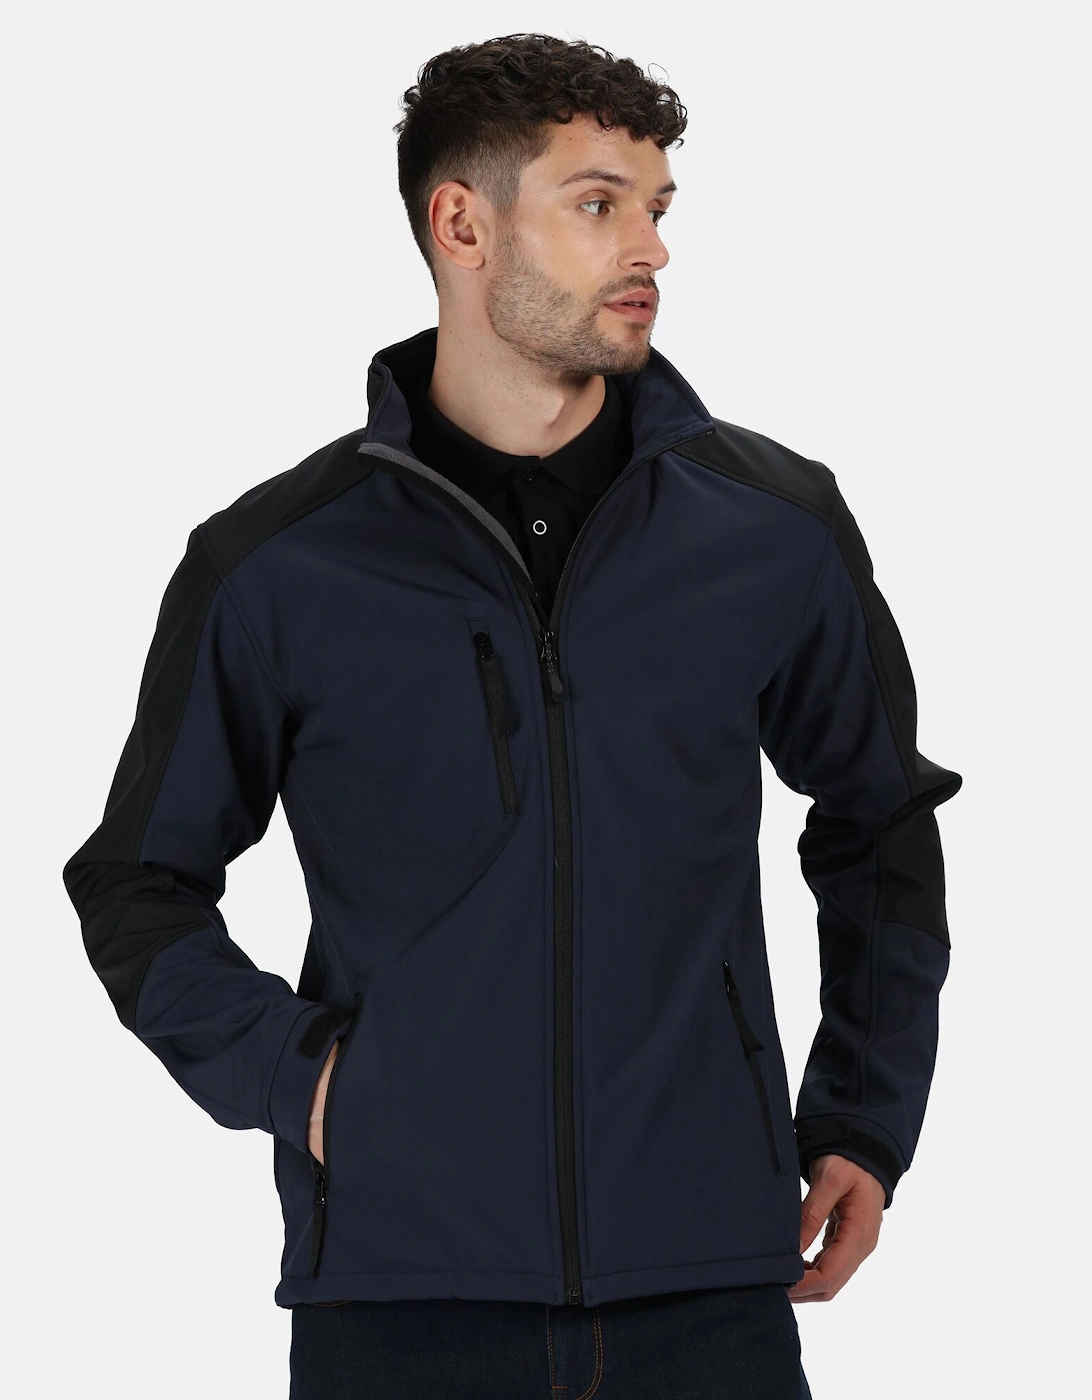 Mens Hydroforce 3-Layer Softshell Jacket (Wind Resistant, Water Repellent & Breathable)